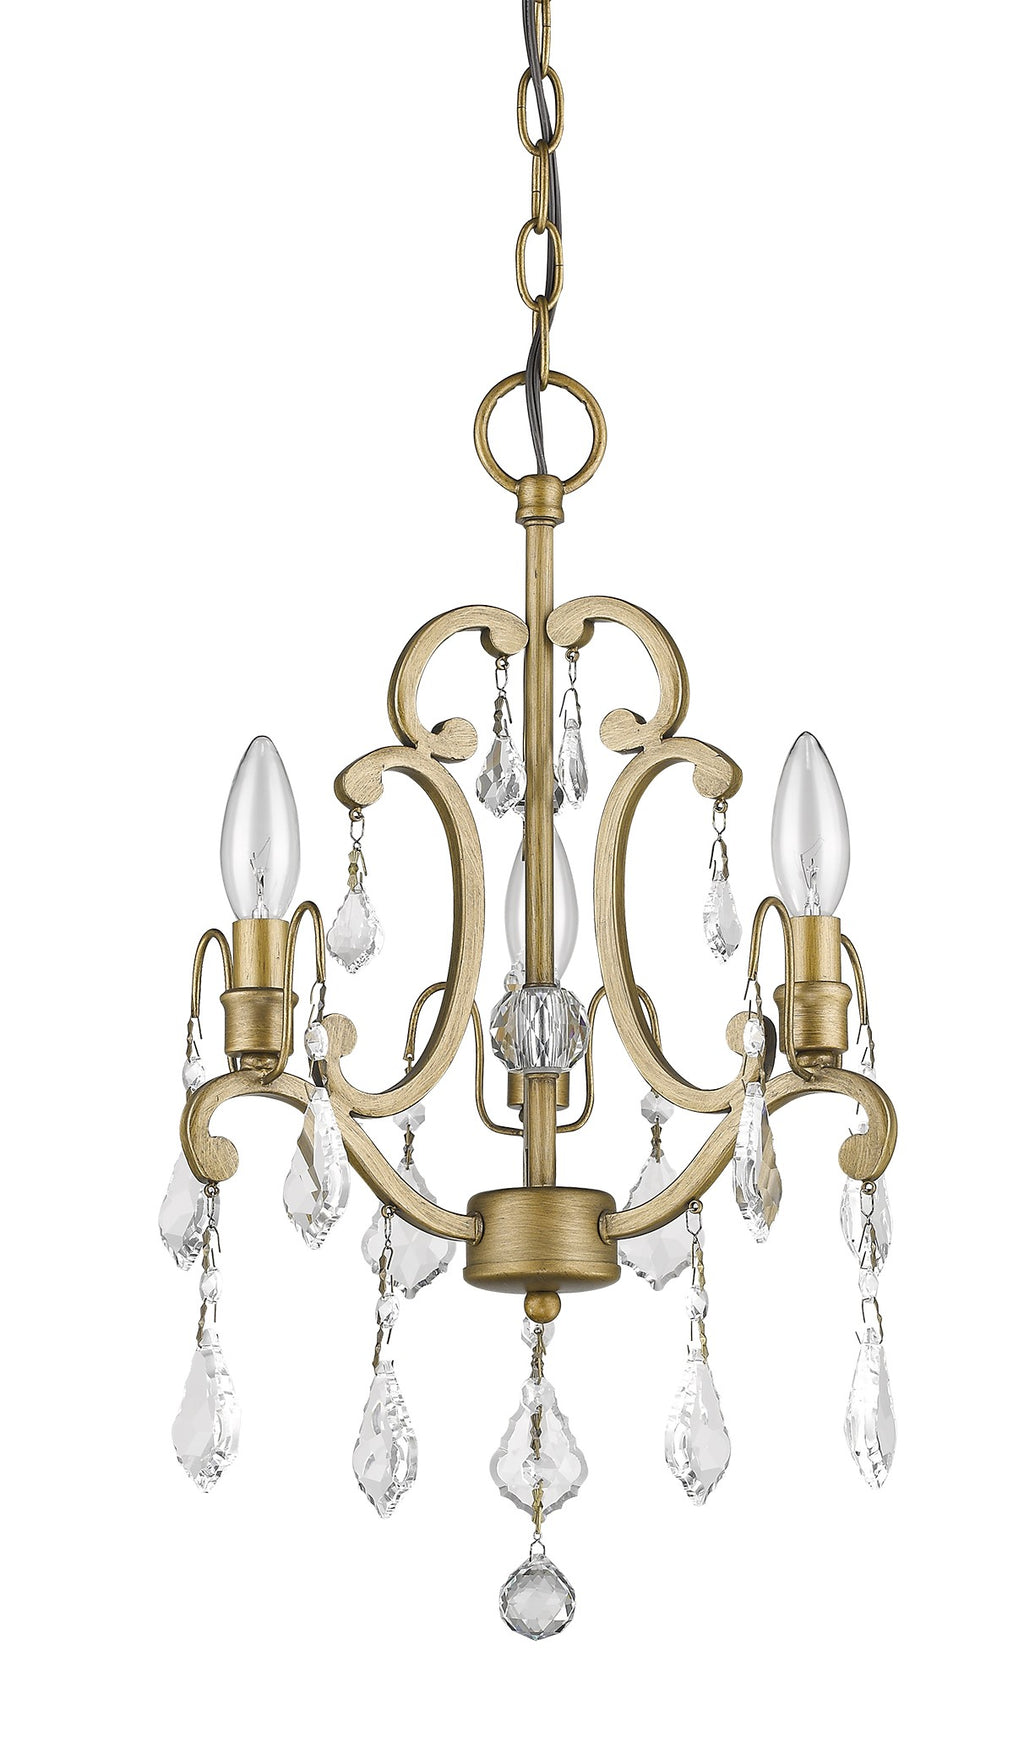 Claire 3-Light Antique Gold Convertible Mini Chandelierto Semi-Flush Mount With Crystal Accents - 99fab 